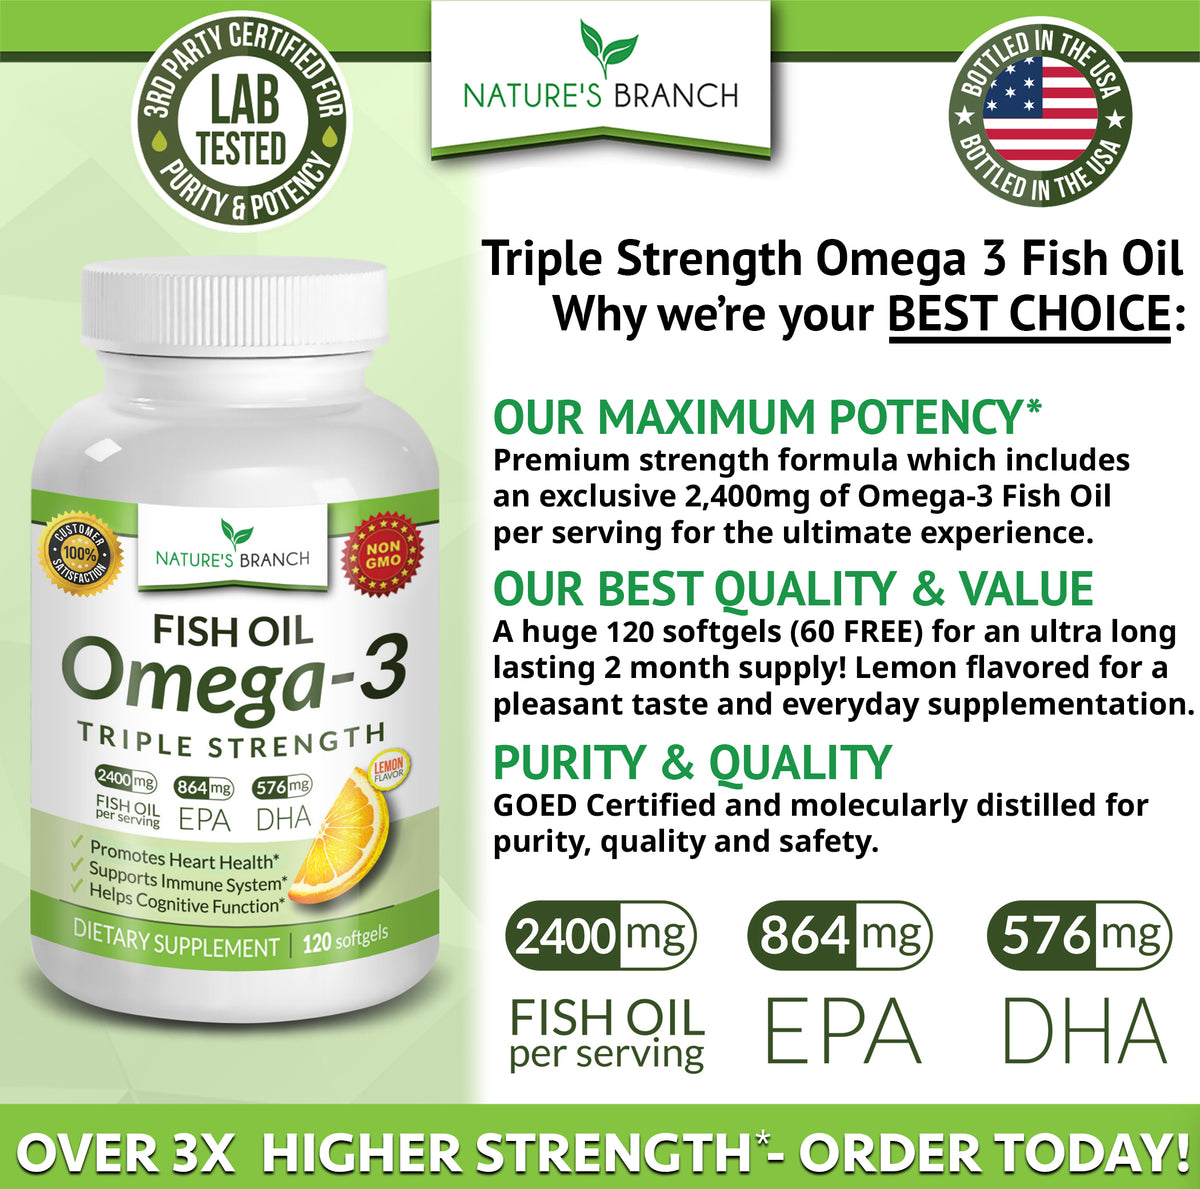 Omega 3 Fish Oil benefits made in USA for quality and potency